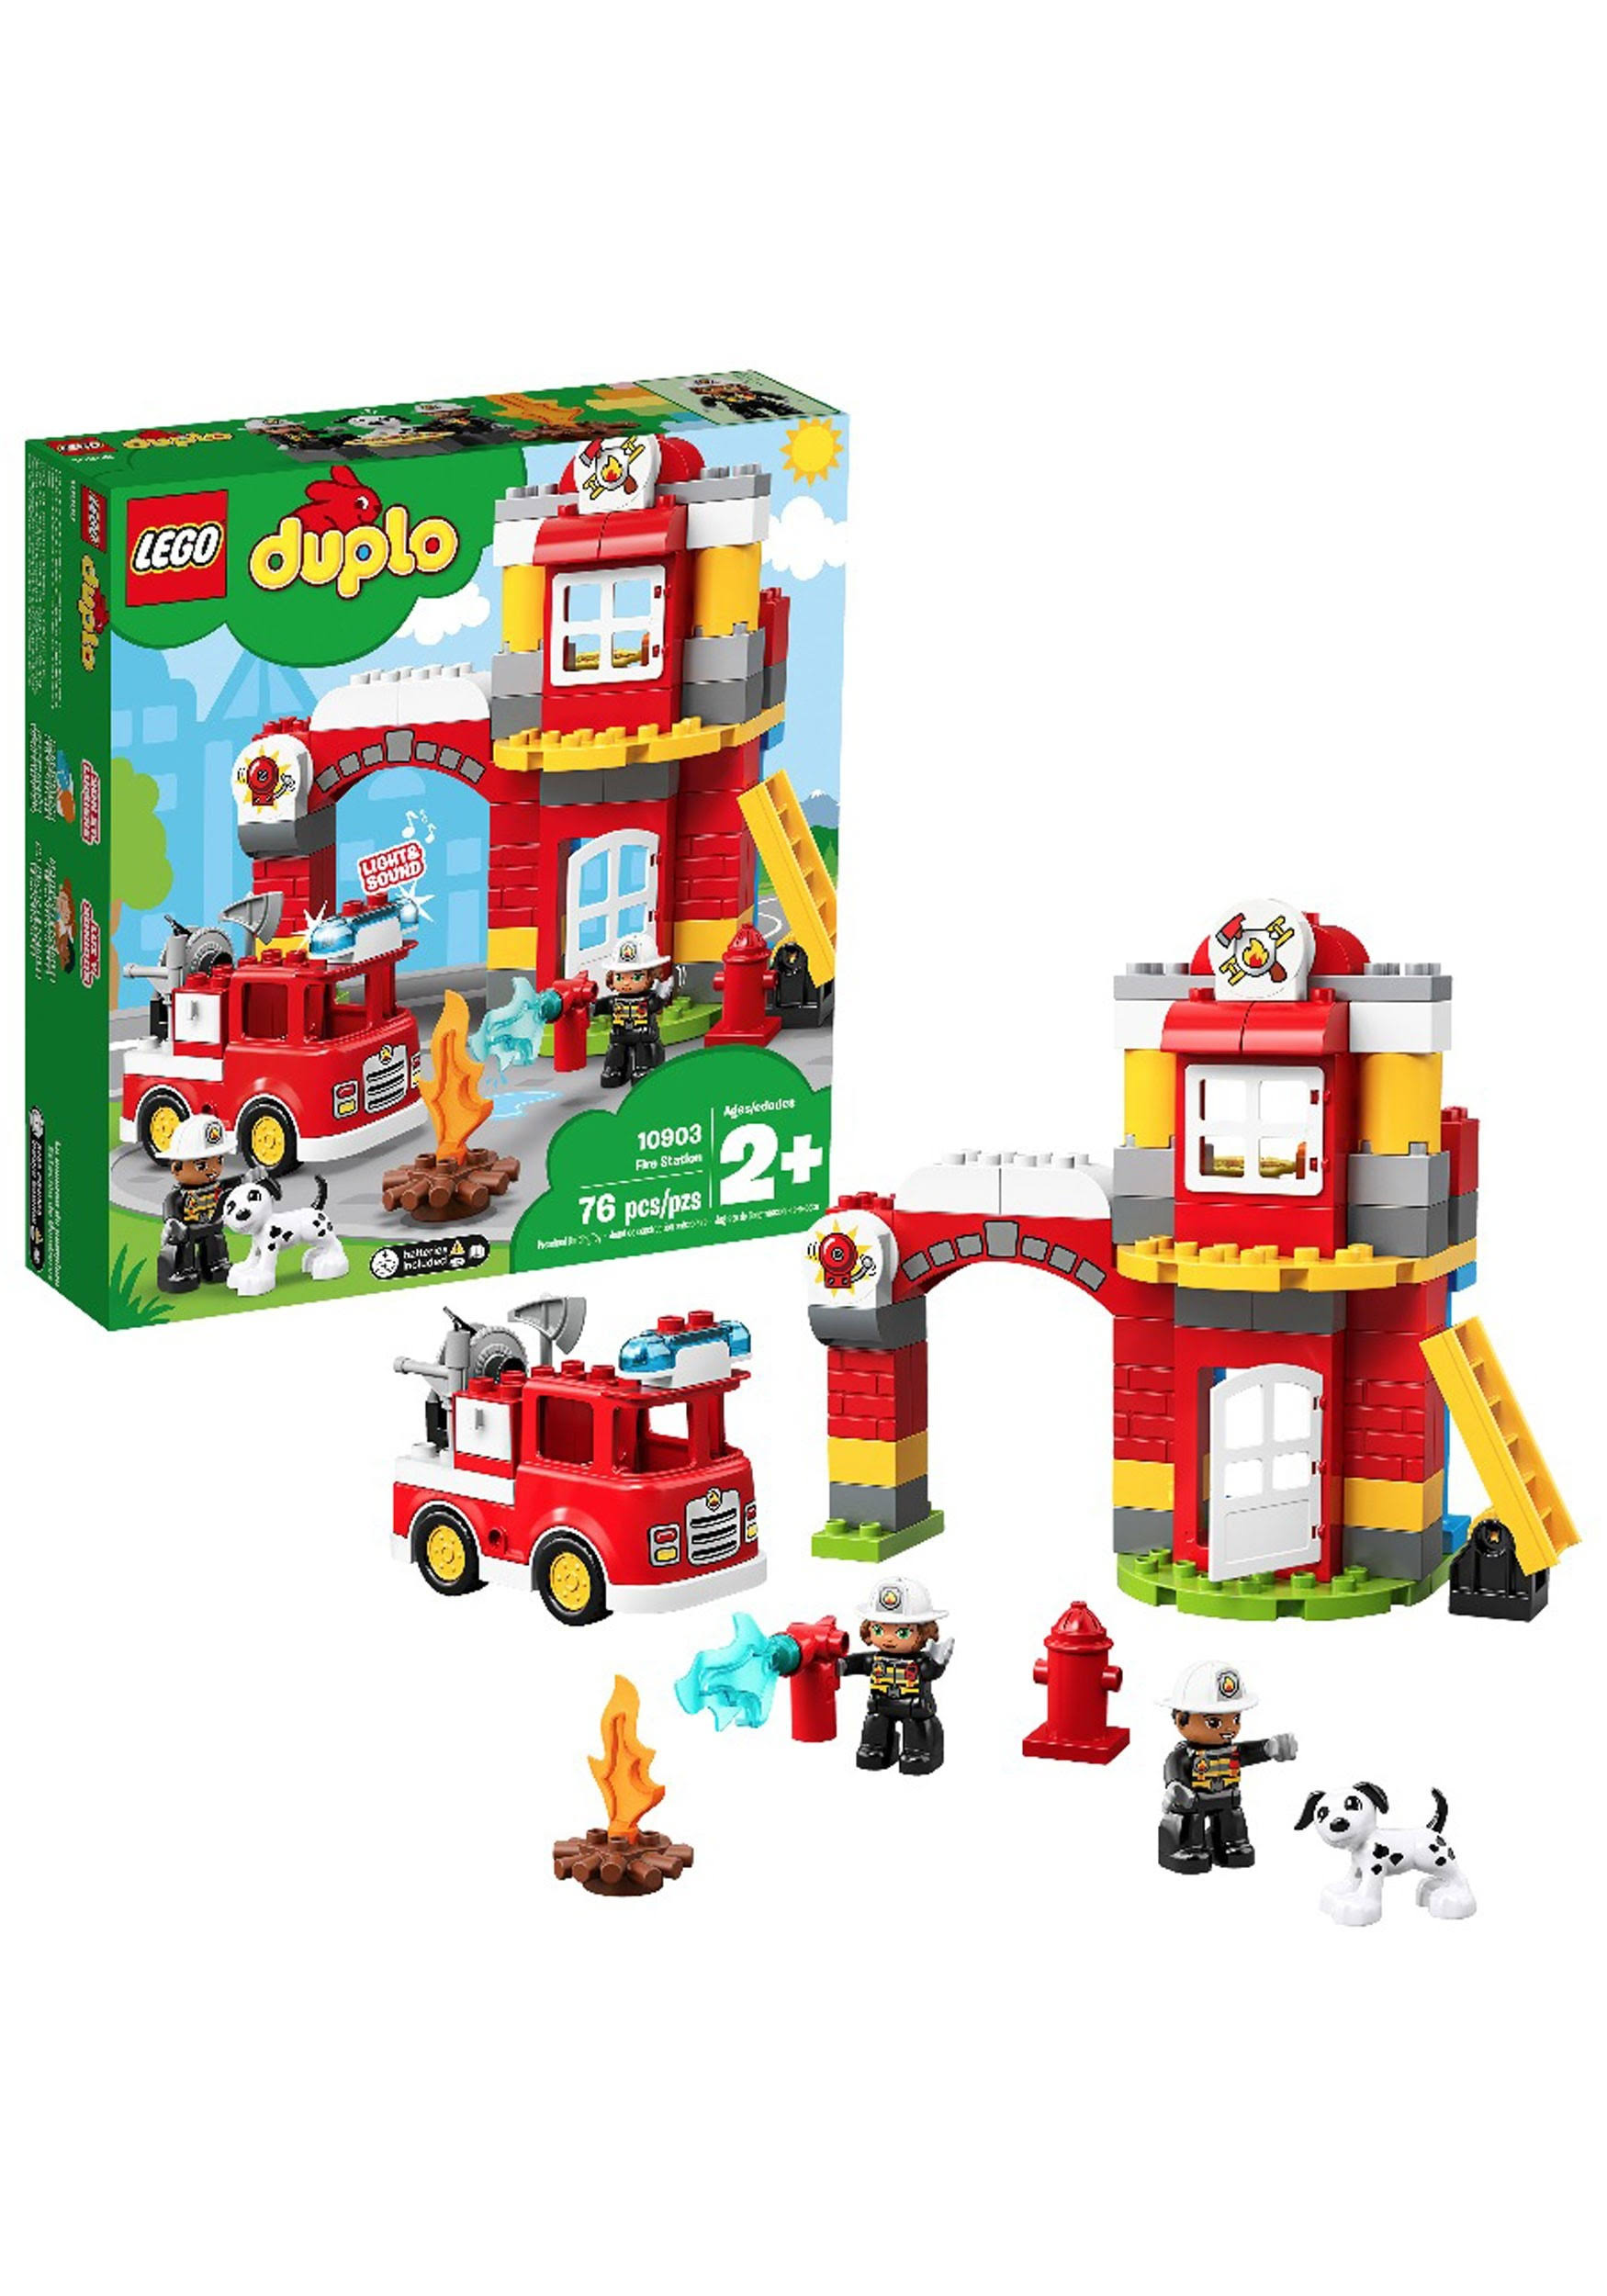 Lego 10903 DUPLO Fire Station New with Sealed Box